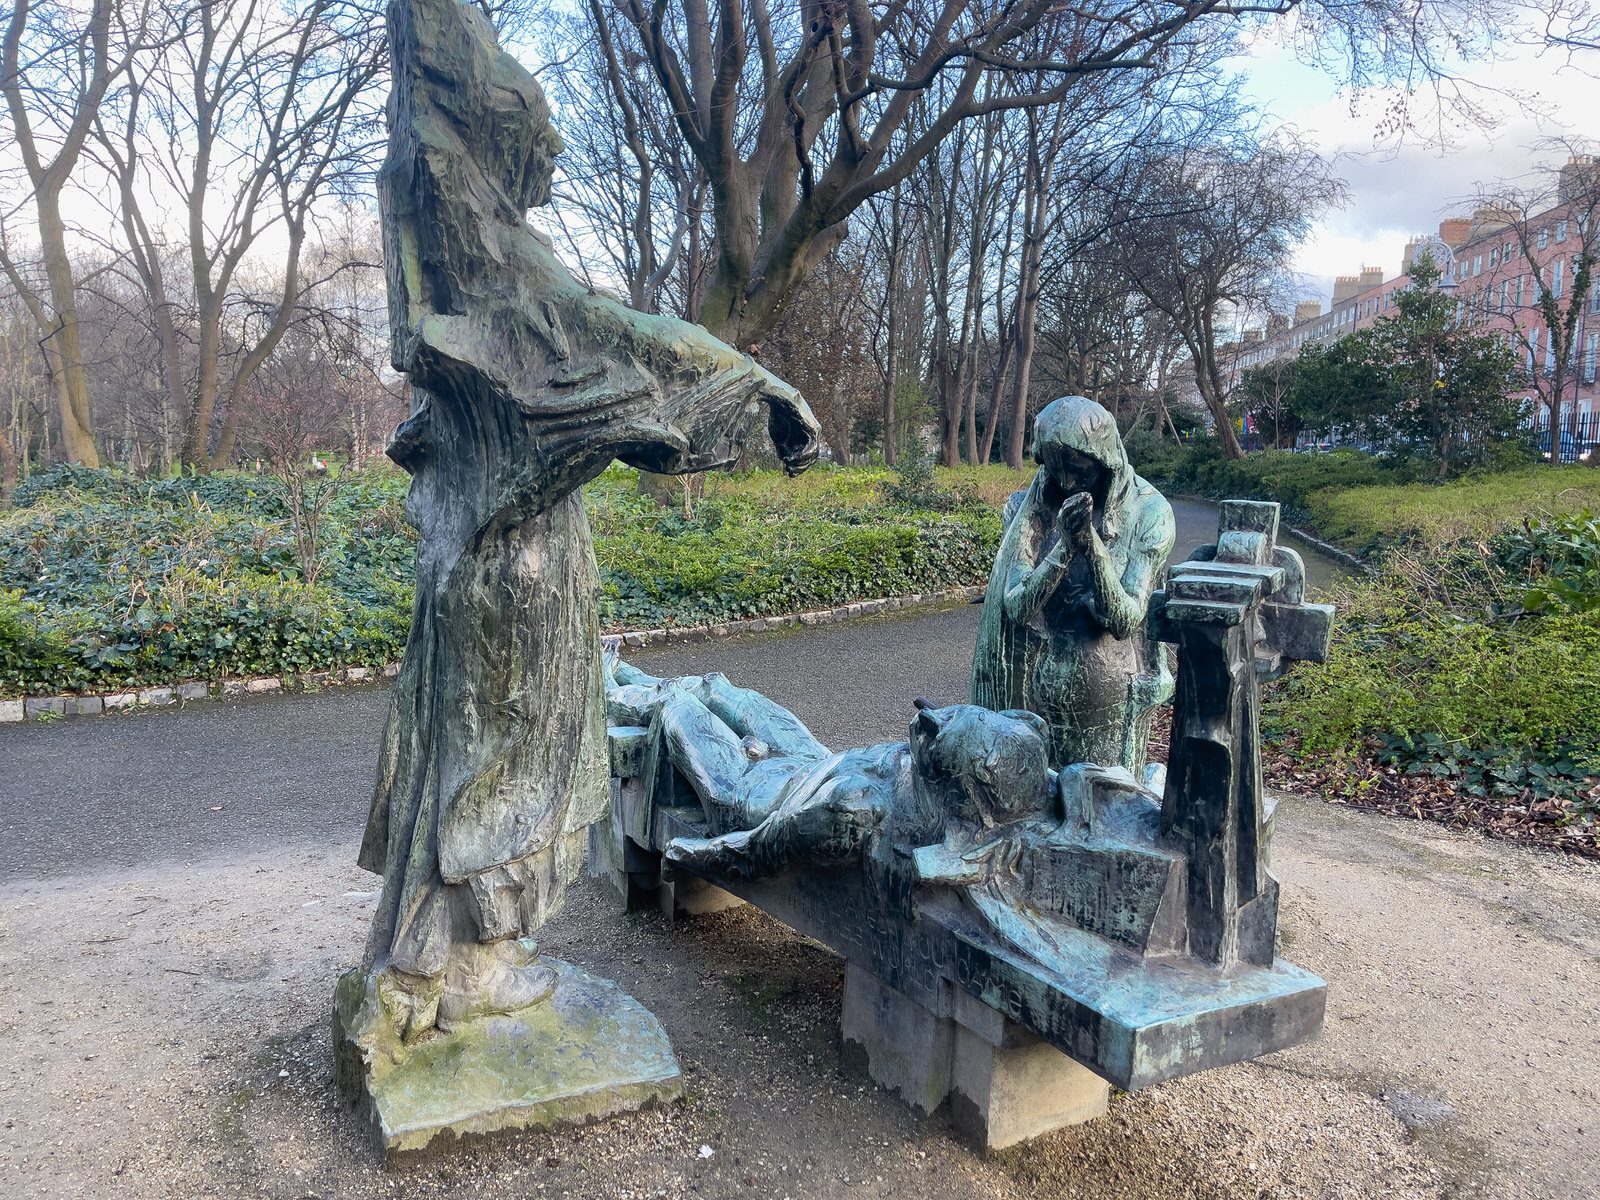 THE VICTIMS BY ANDREW O’CONNOR IN MERRION SQUARE PARK 001